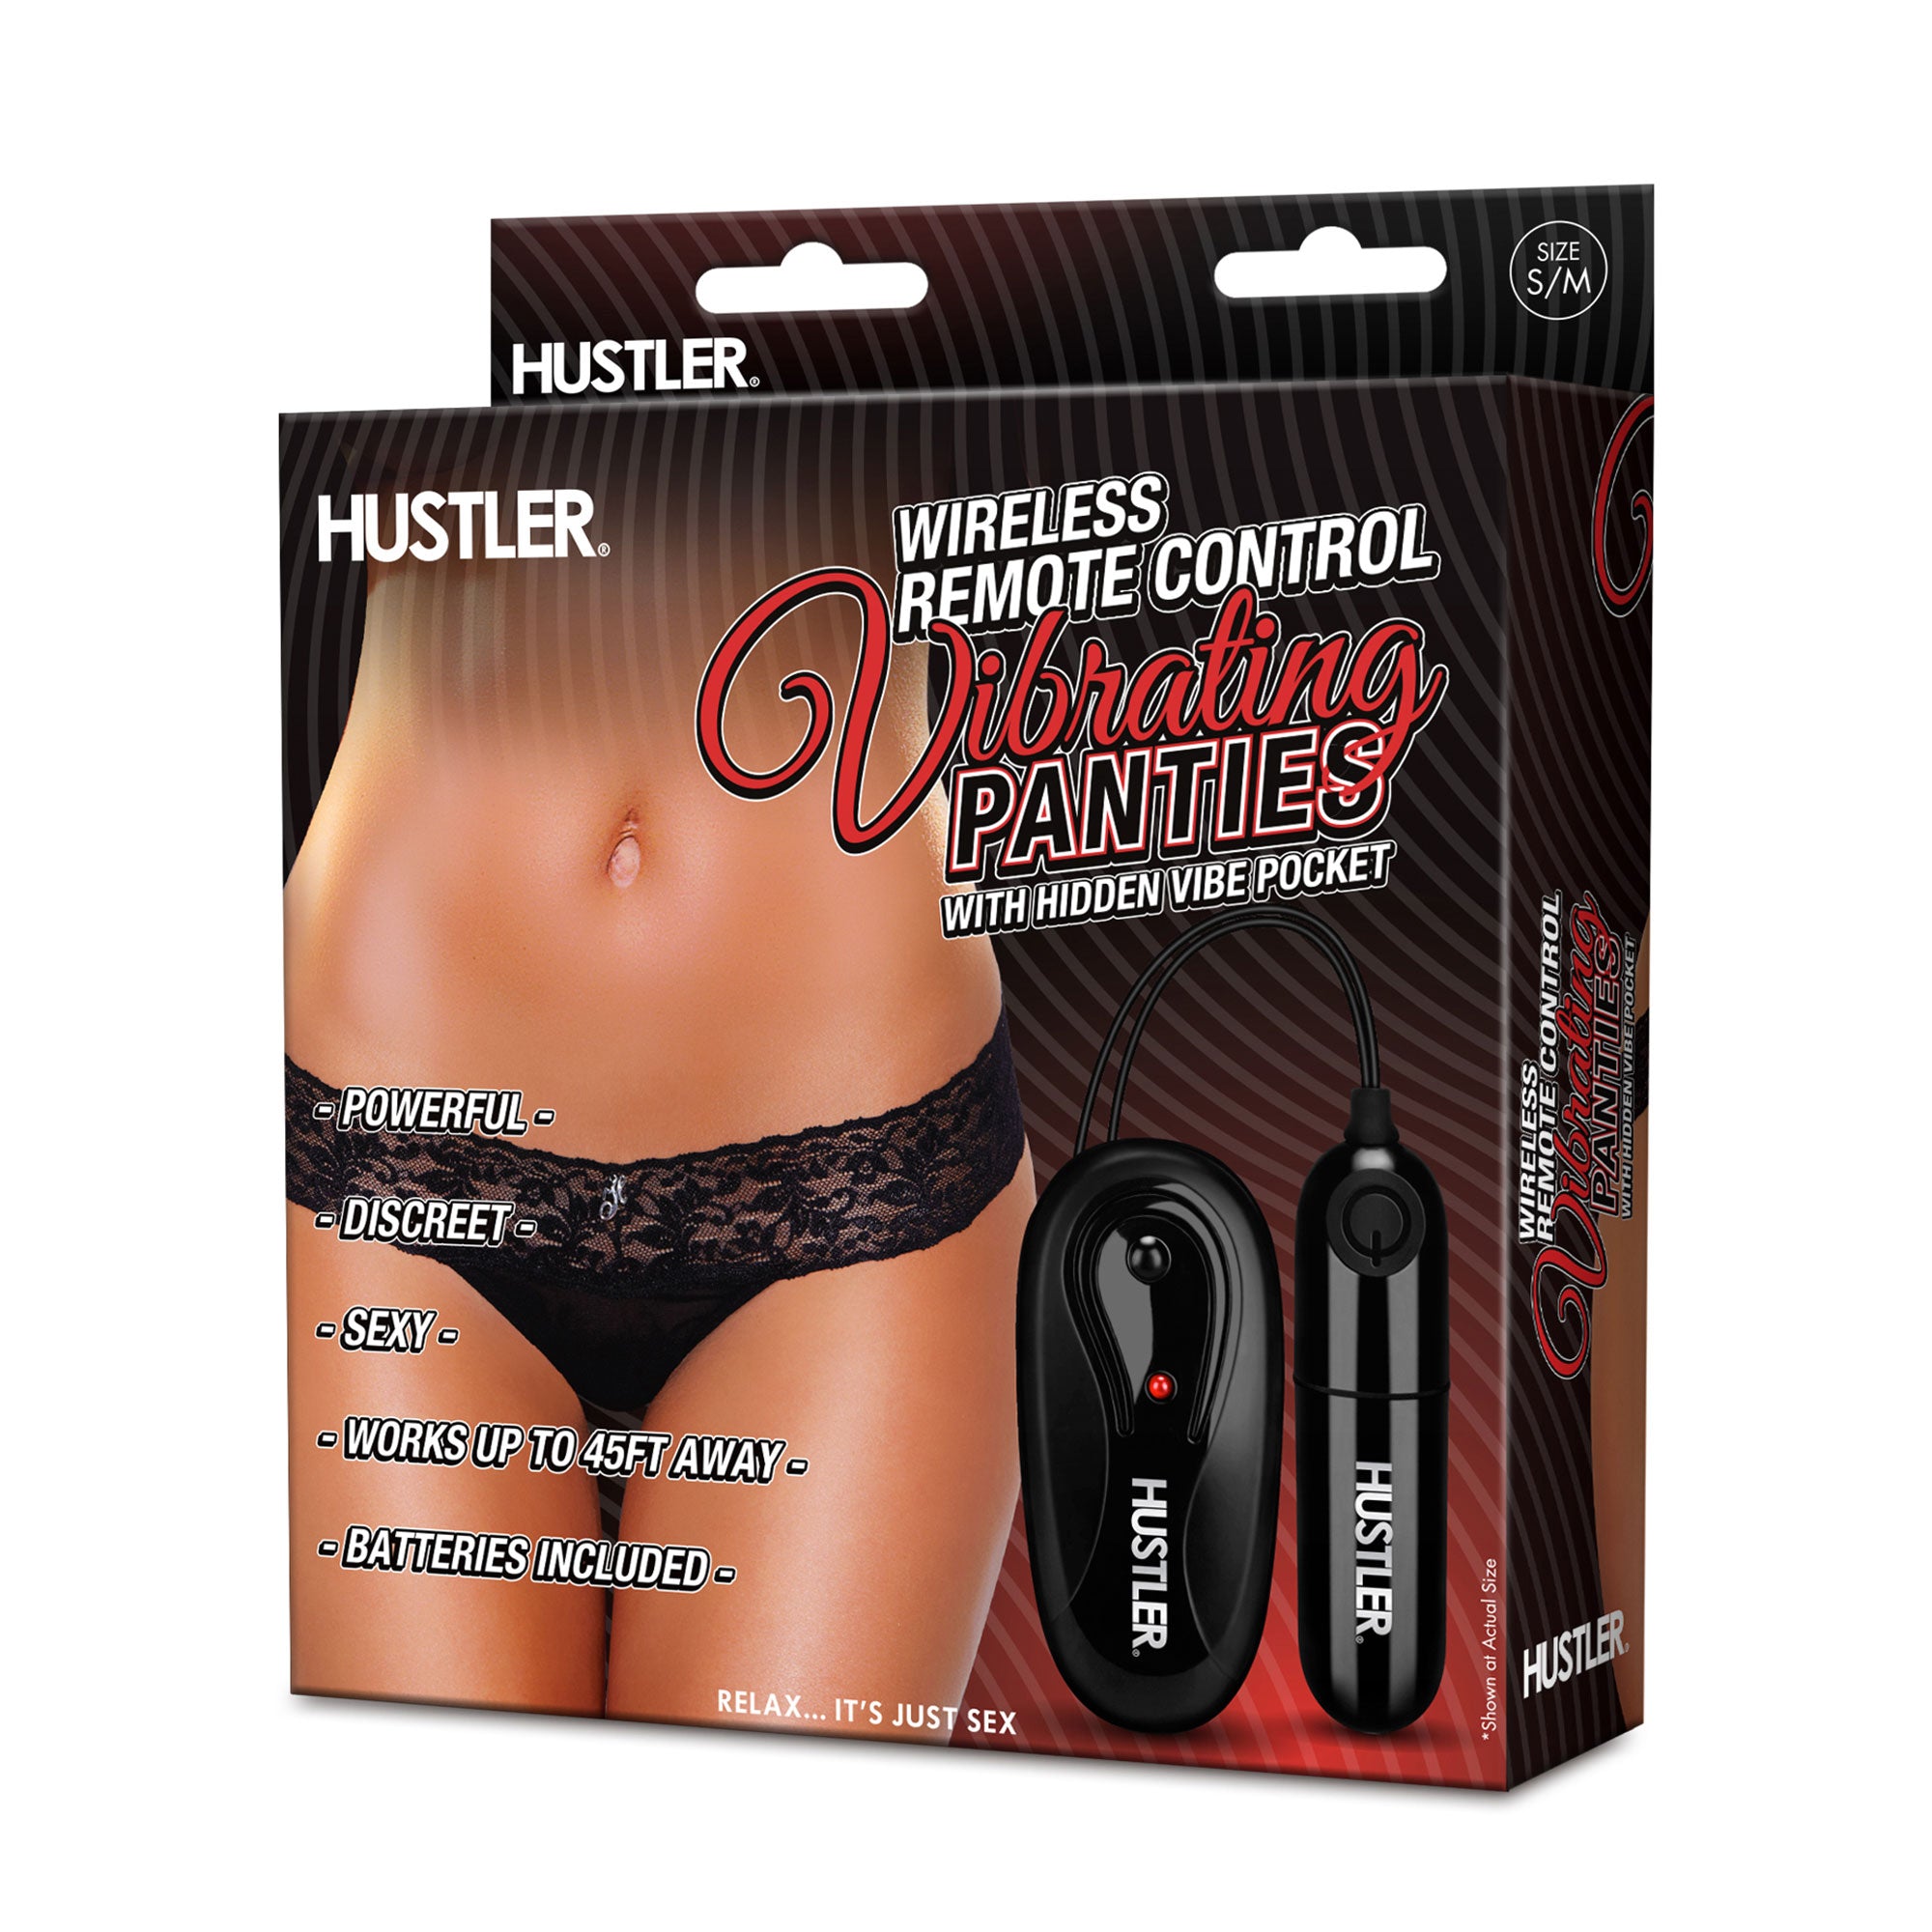 Vibrating Panties with Wireless Remote Control - Black